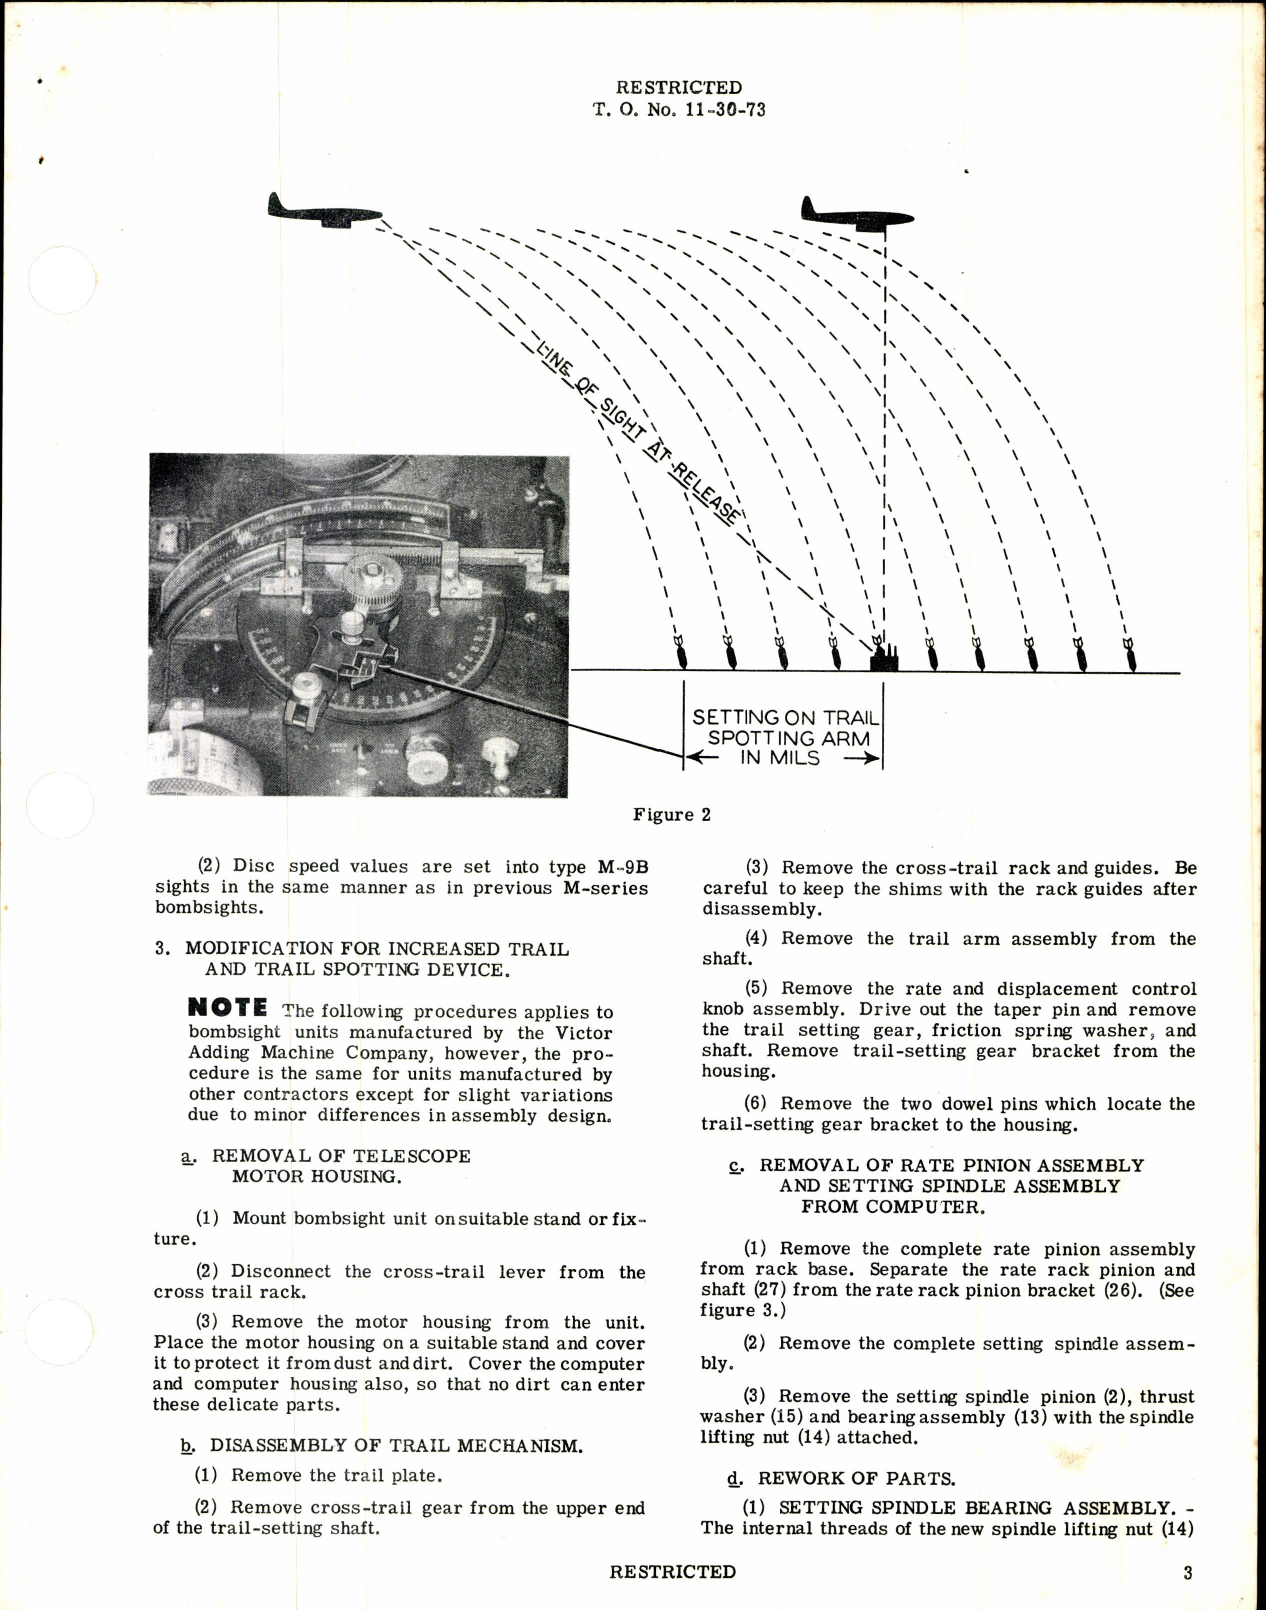 Sample page 1 from AirCorps Library document: Modification and Operation of M Series Bombsights